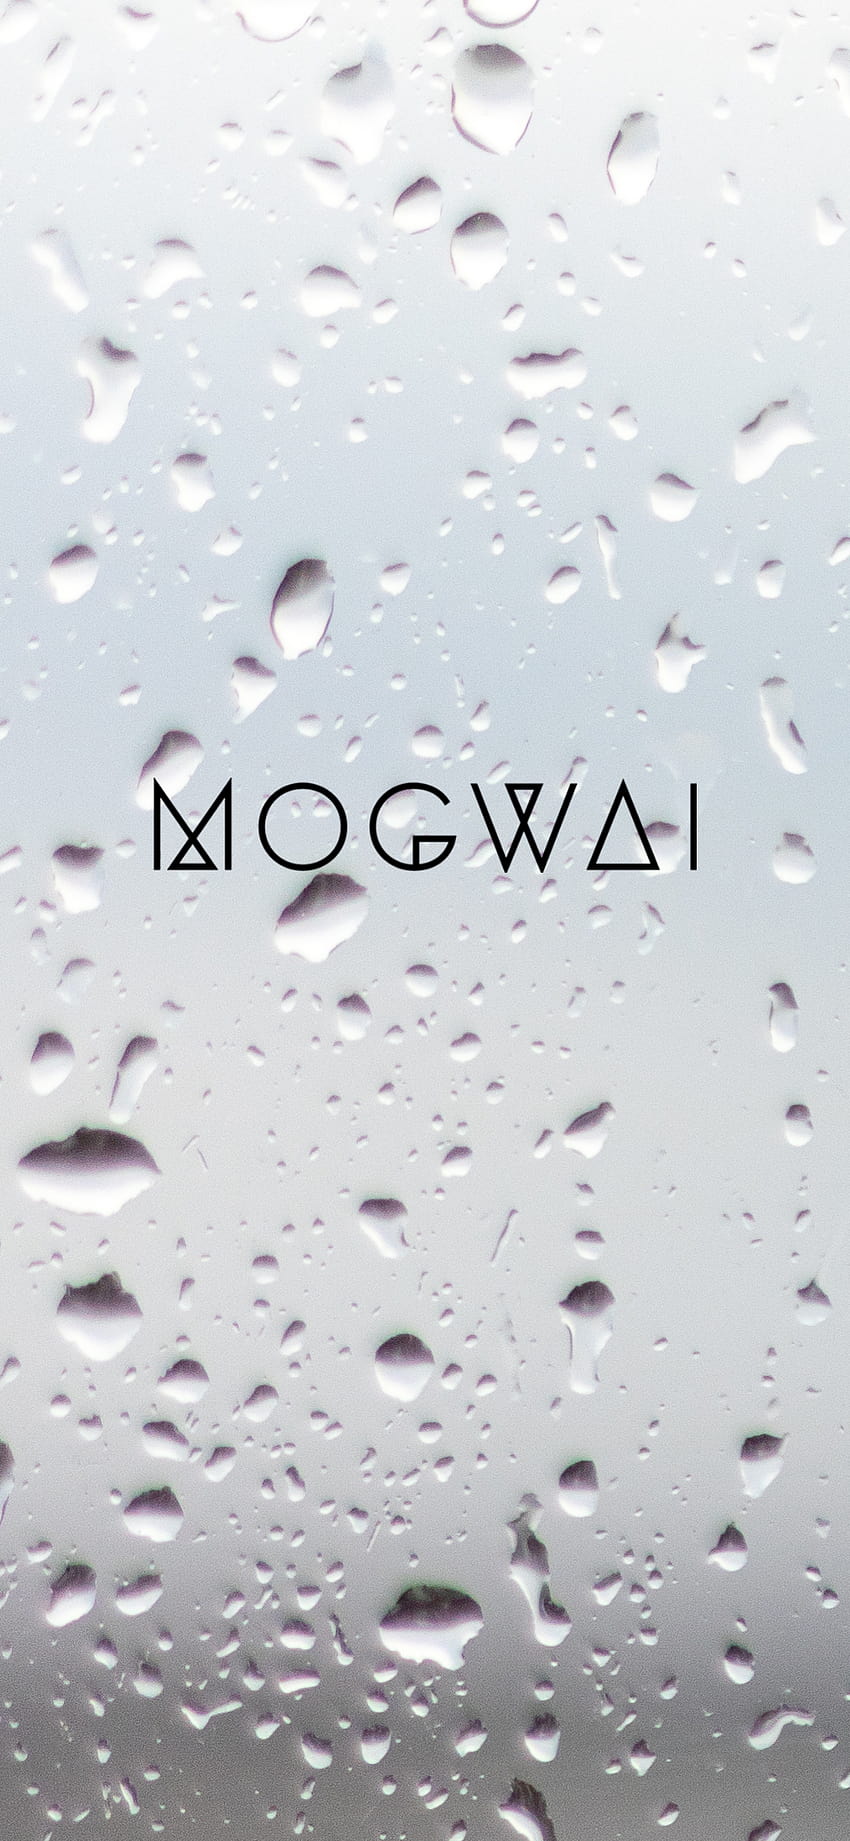 I created Mogwai phone for Android & iPhone. I made one based on The Shining because of Stuart's affinity towards it, and kind of ran with the rest. Swipe to find HD phone wallpaper